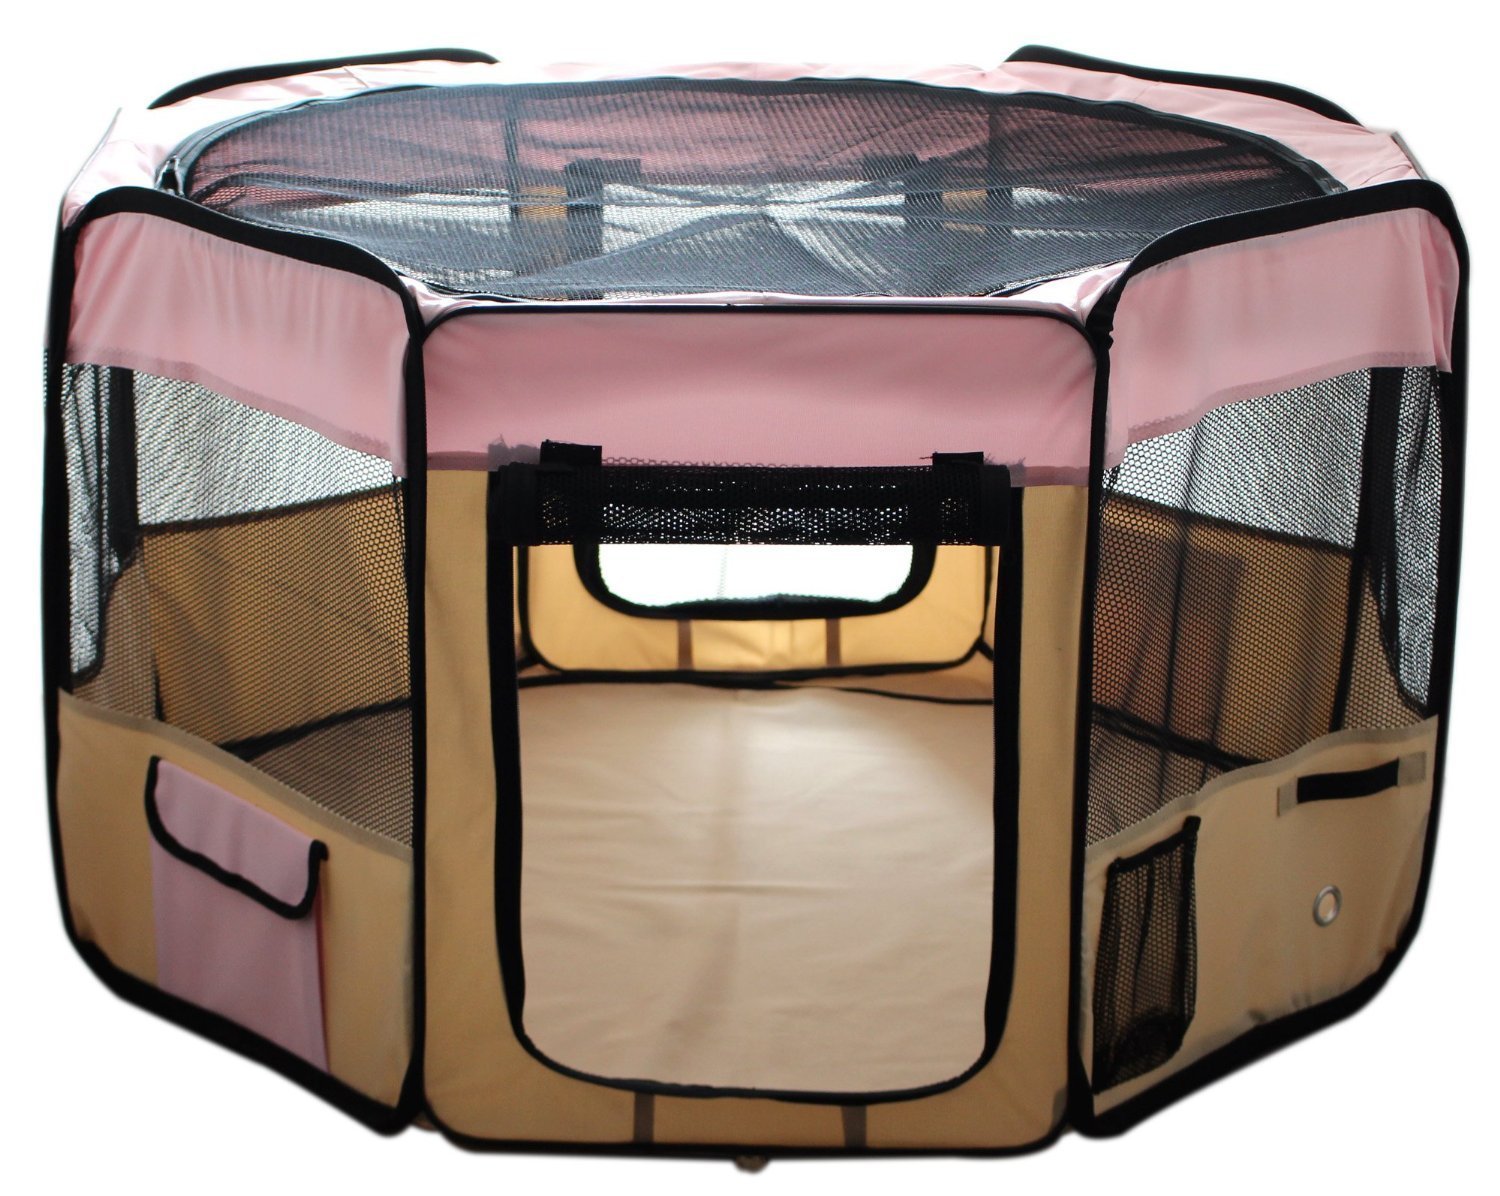 ESK COLLECTION Dog Playpen